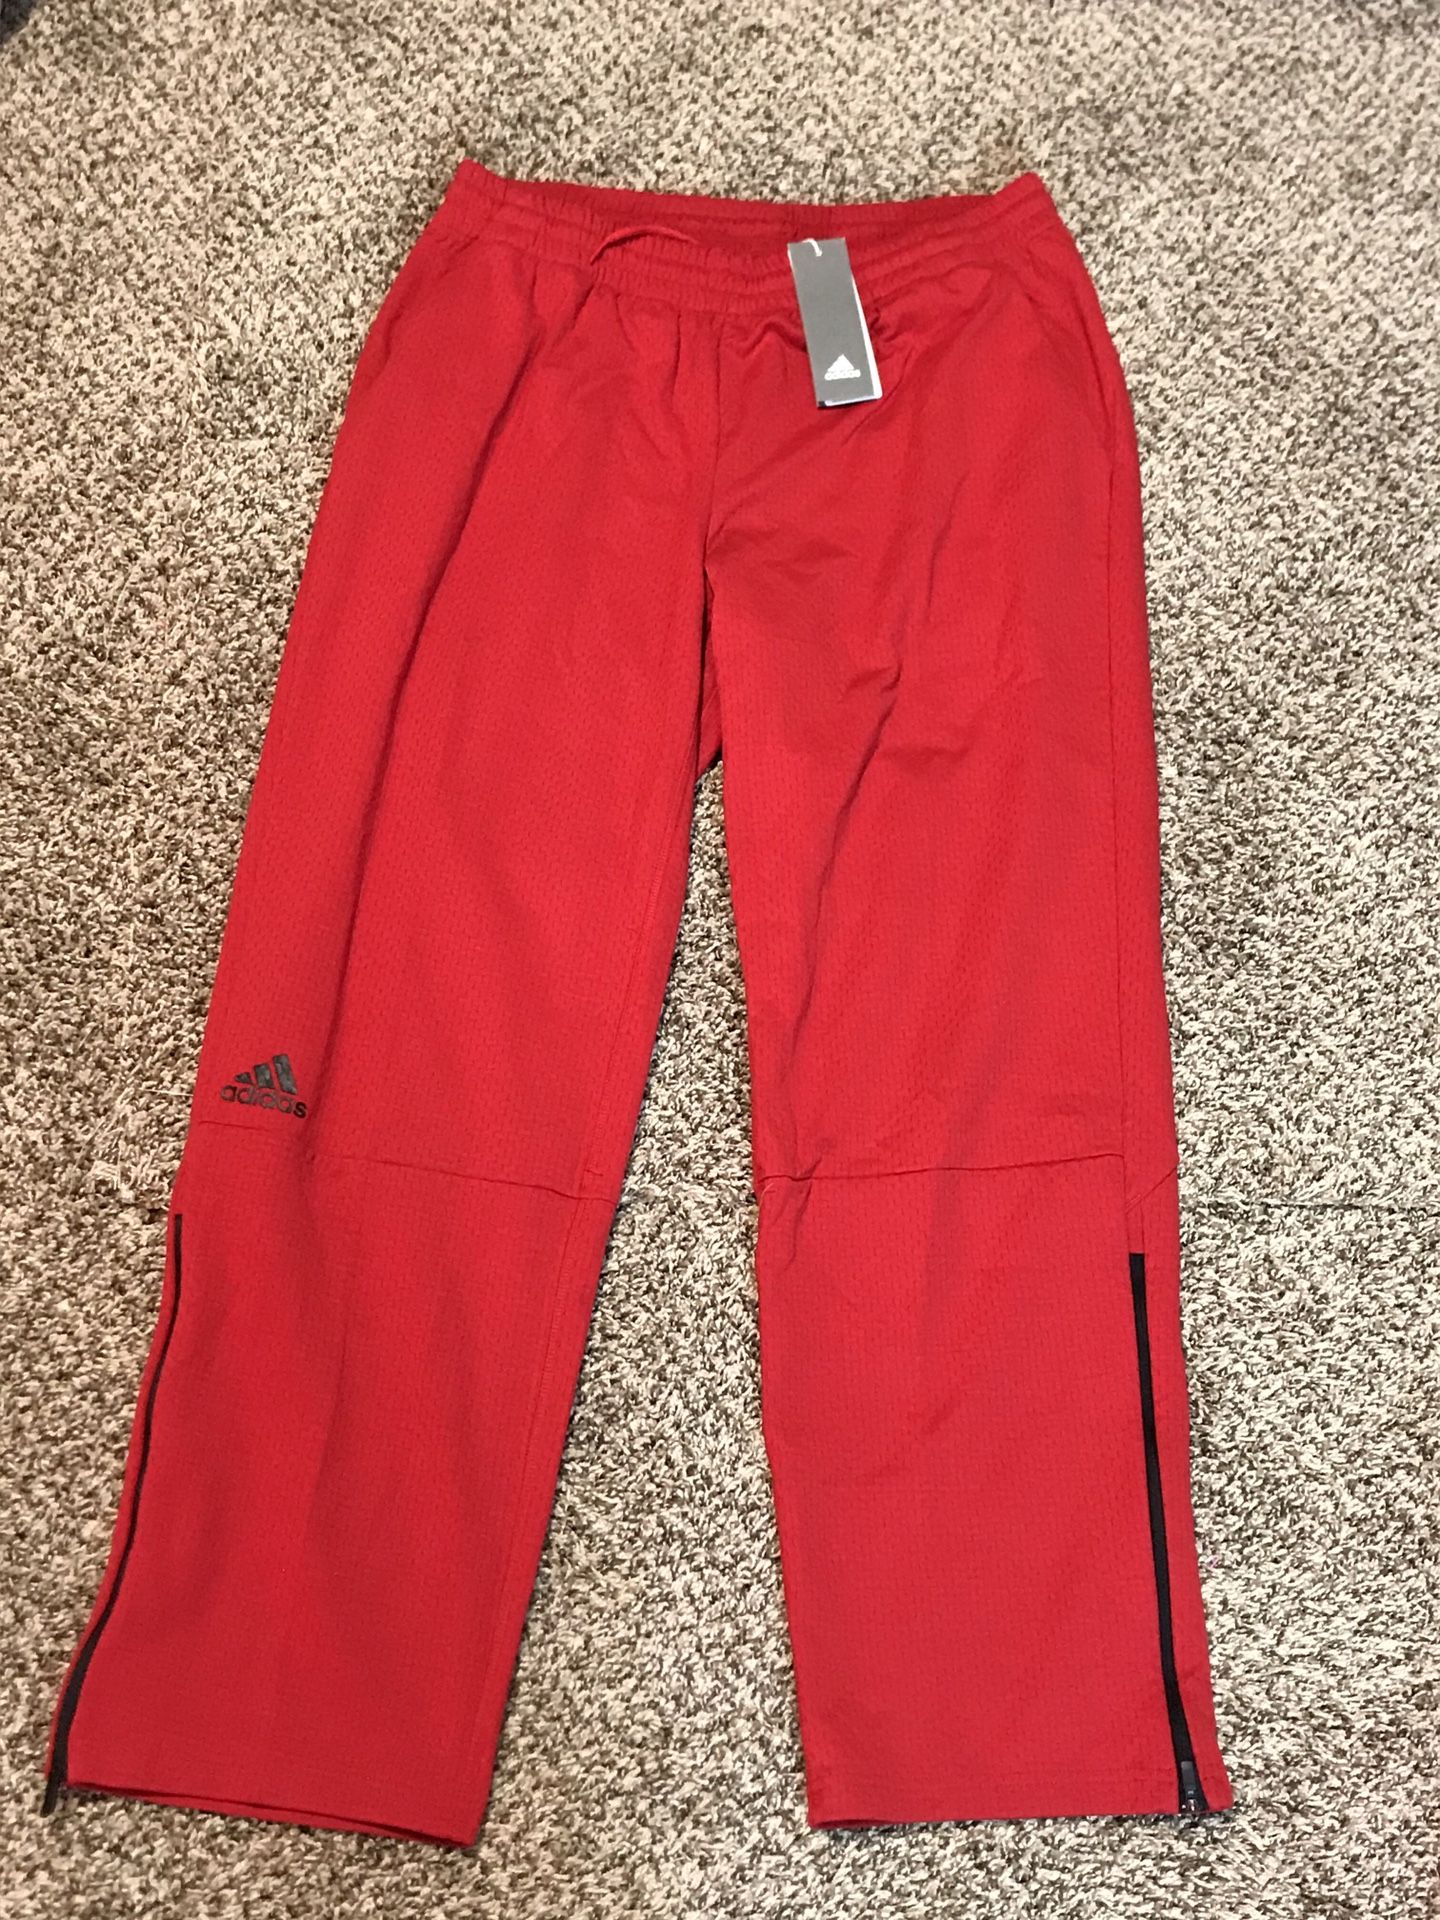 Adidas Men's Squad Pant, Red. New with tags